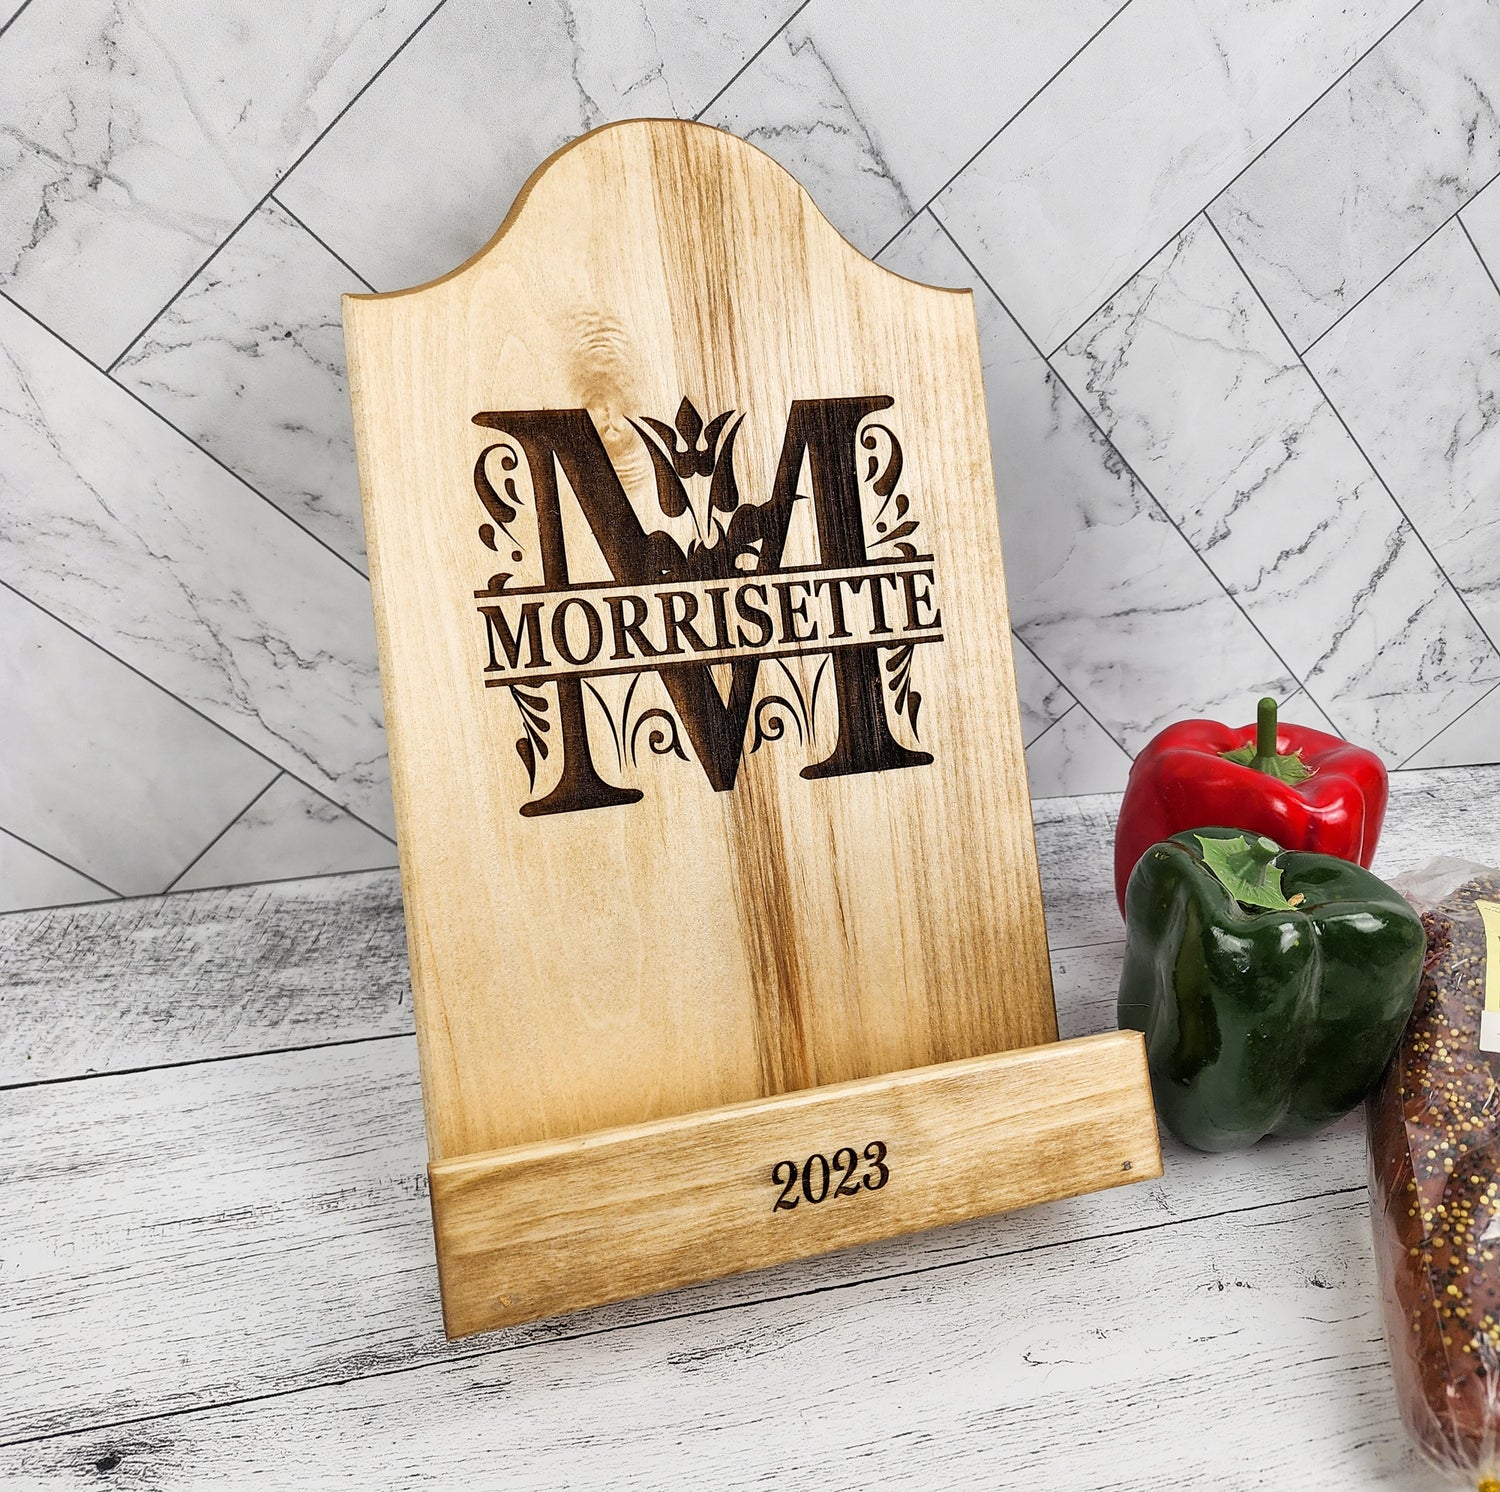 Custom Engraved Recipe or Tablet Stands - Perfect Custom Kitchen Decor, Large & Small options